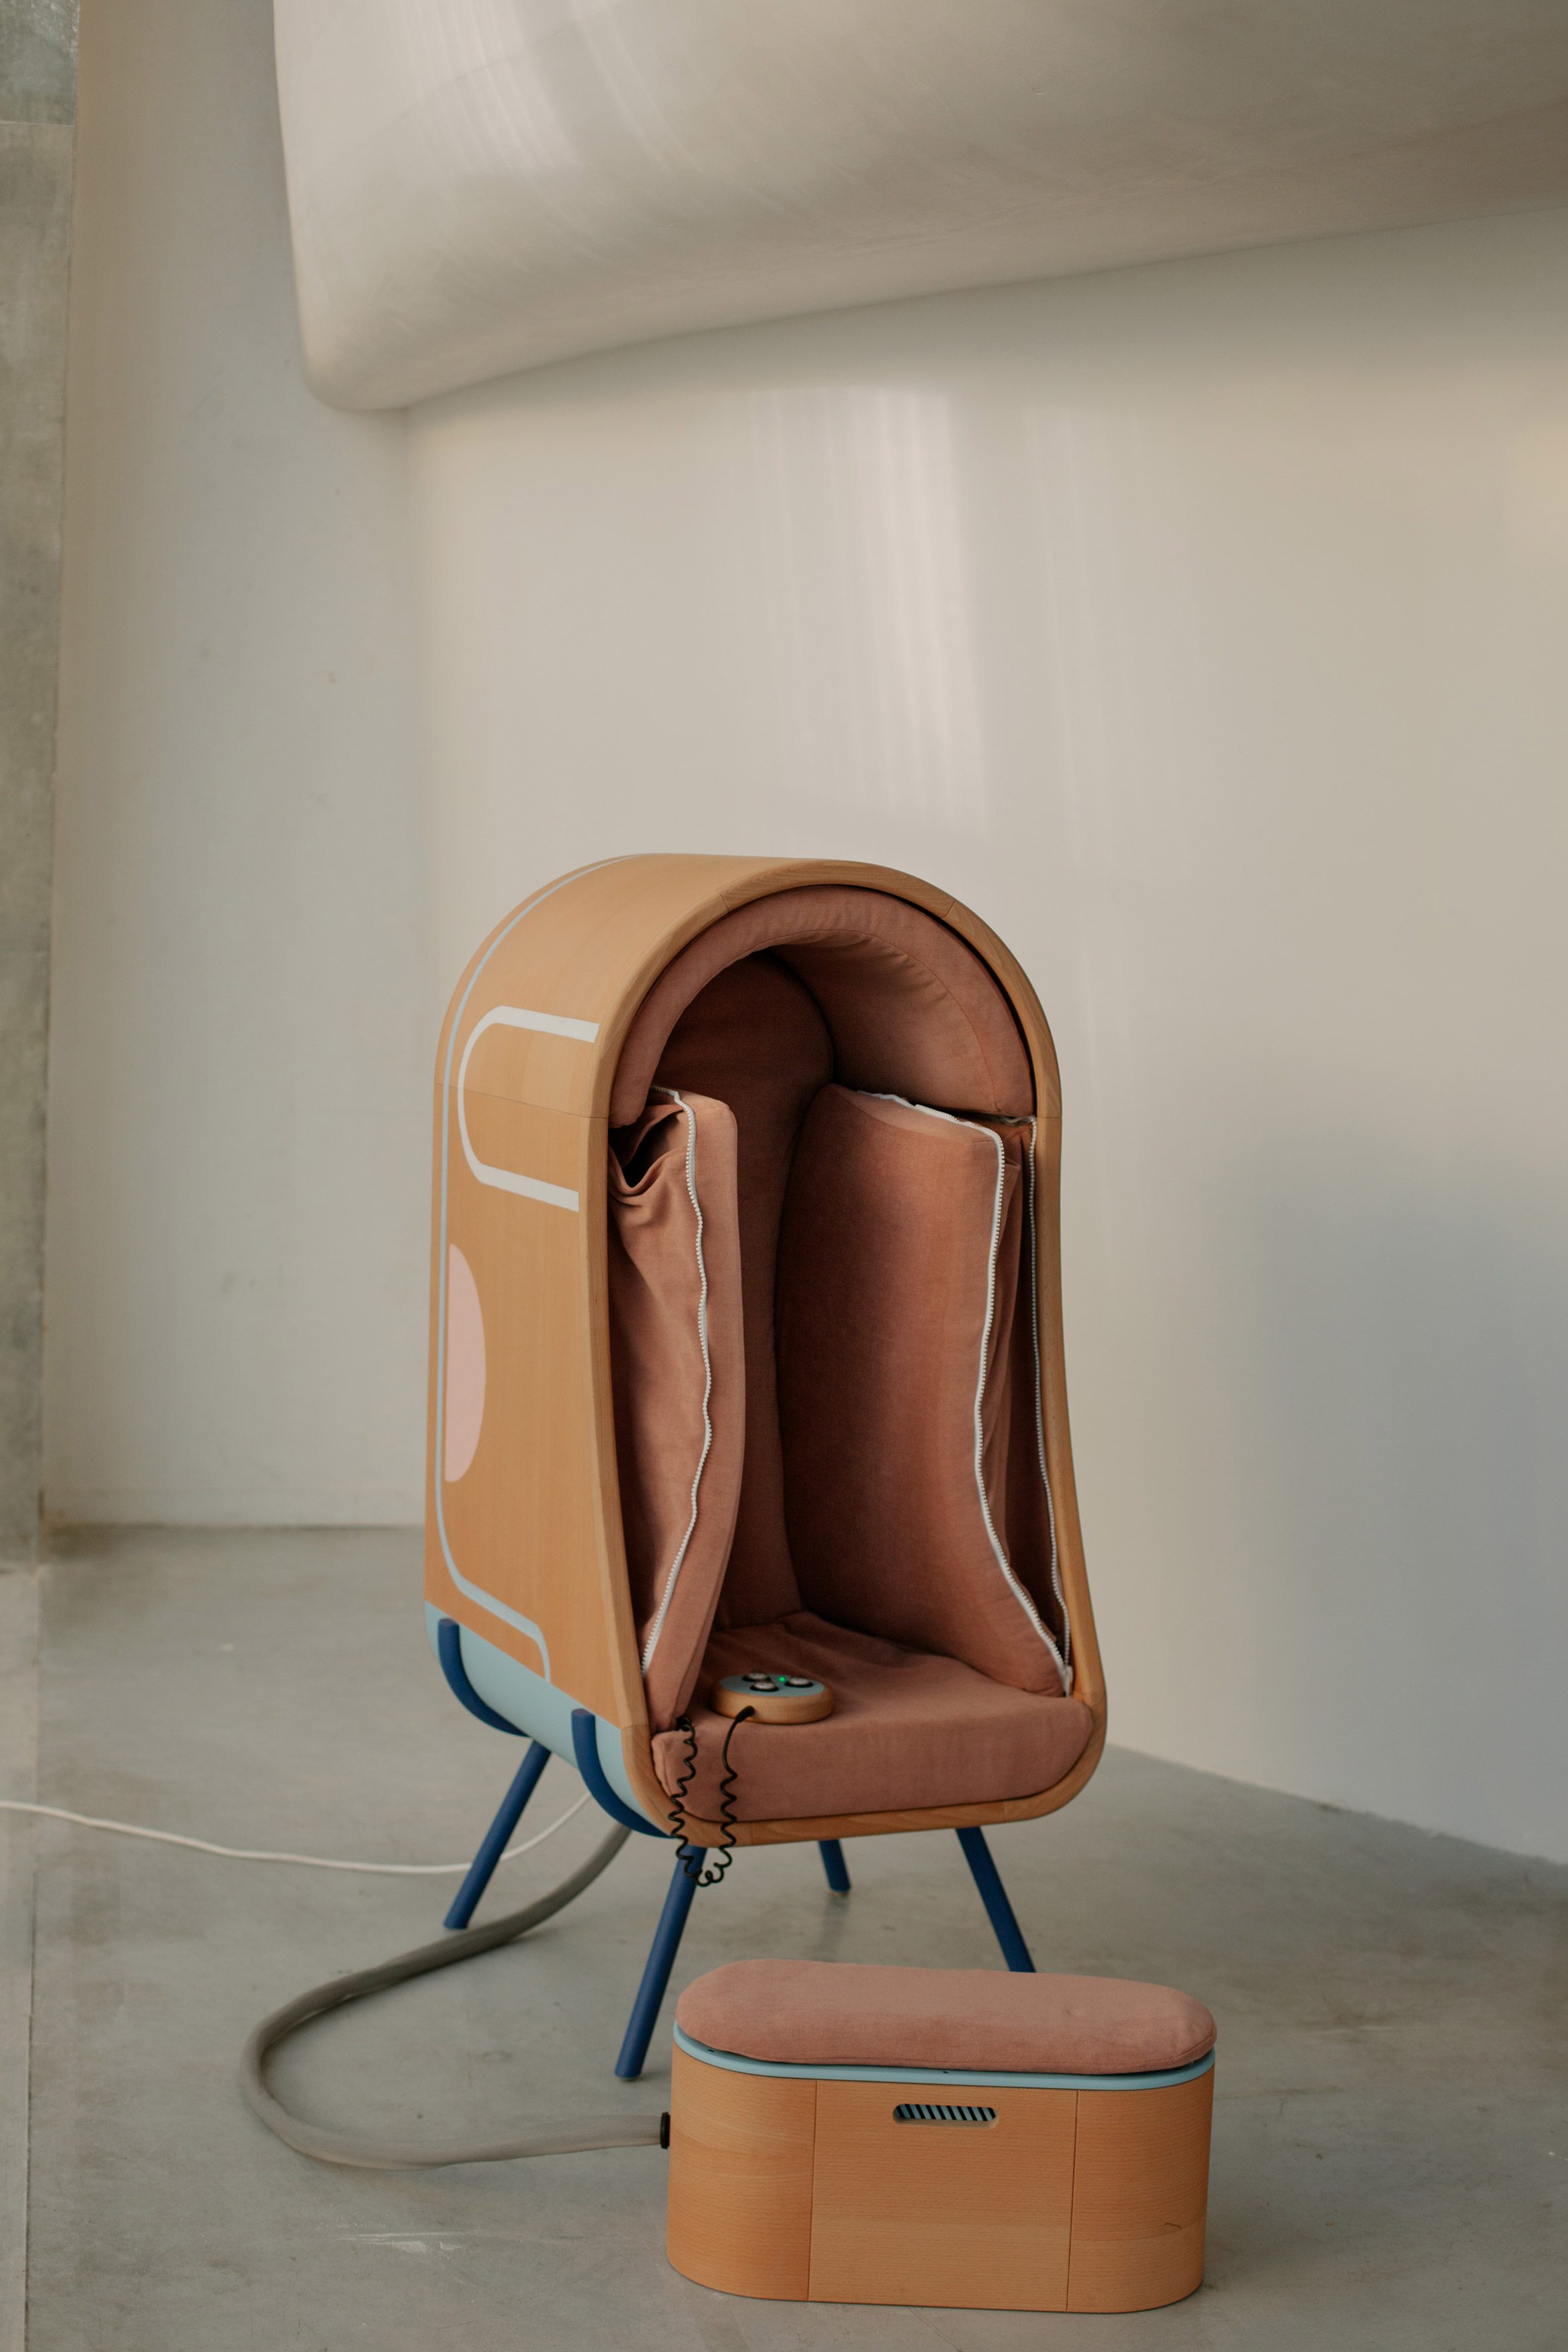 Oto hugging chair with inflatable walls